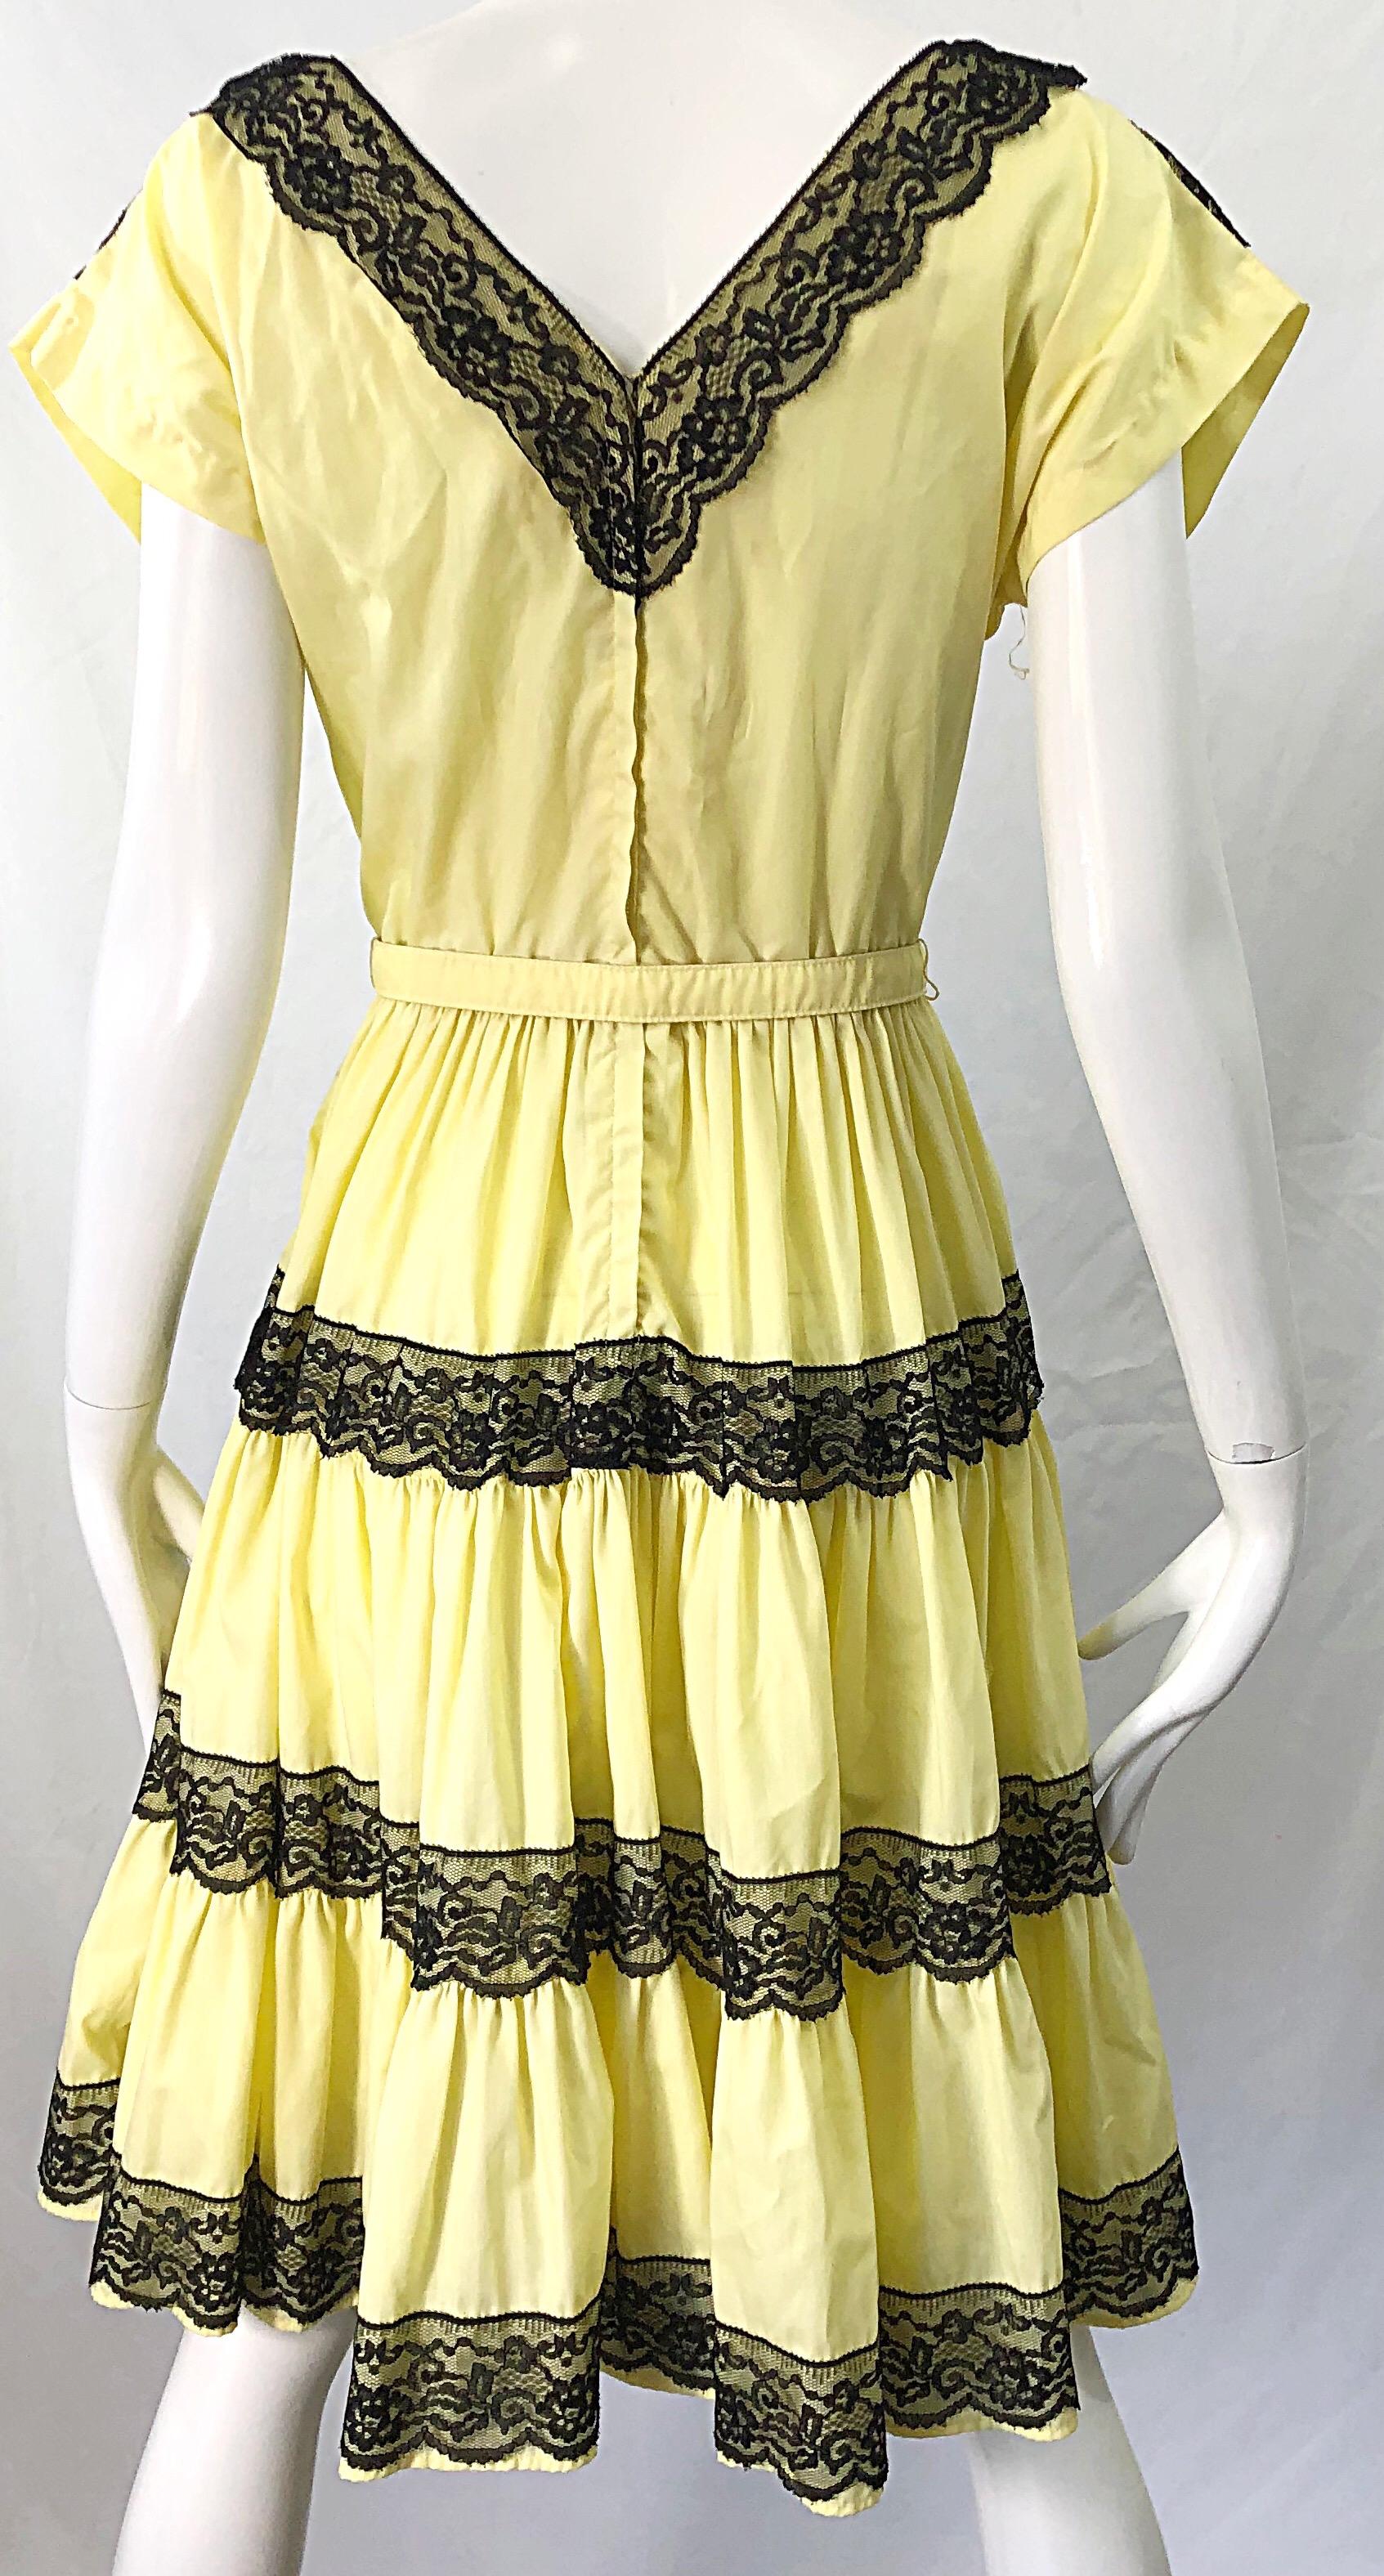 1950s Bettina of Miami Yellow + Black Cotton Lace Fit n' Flare Vintage 50s Dress For Sale 2